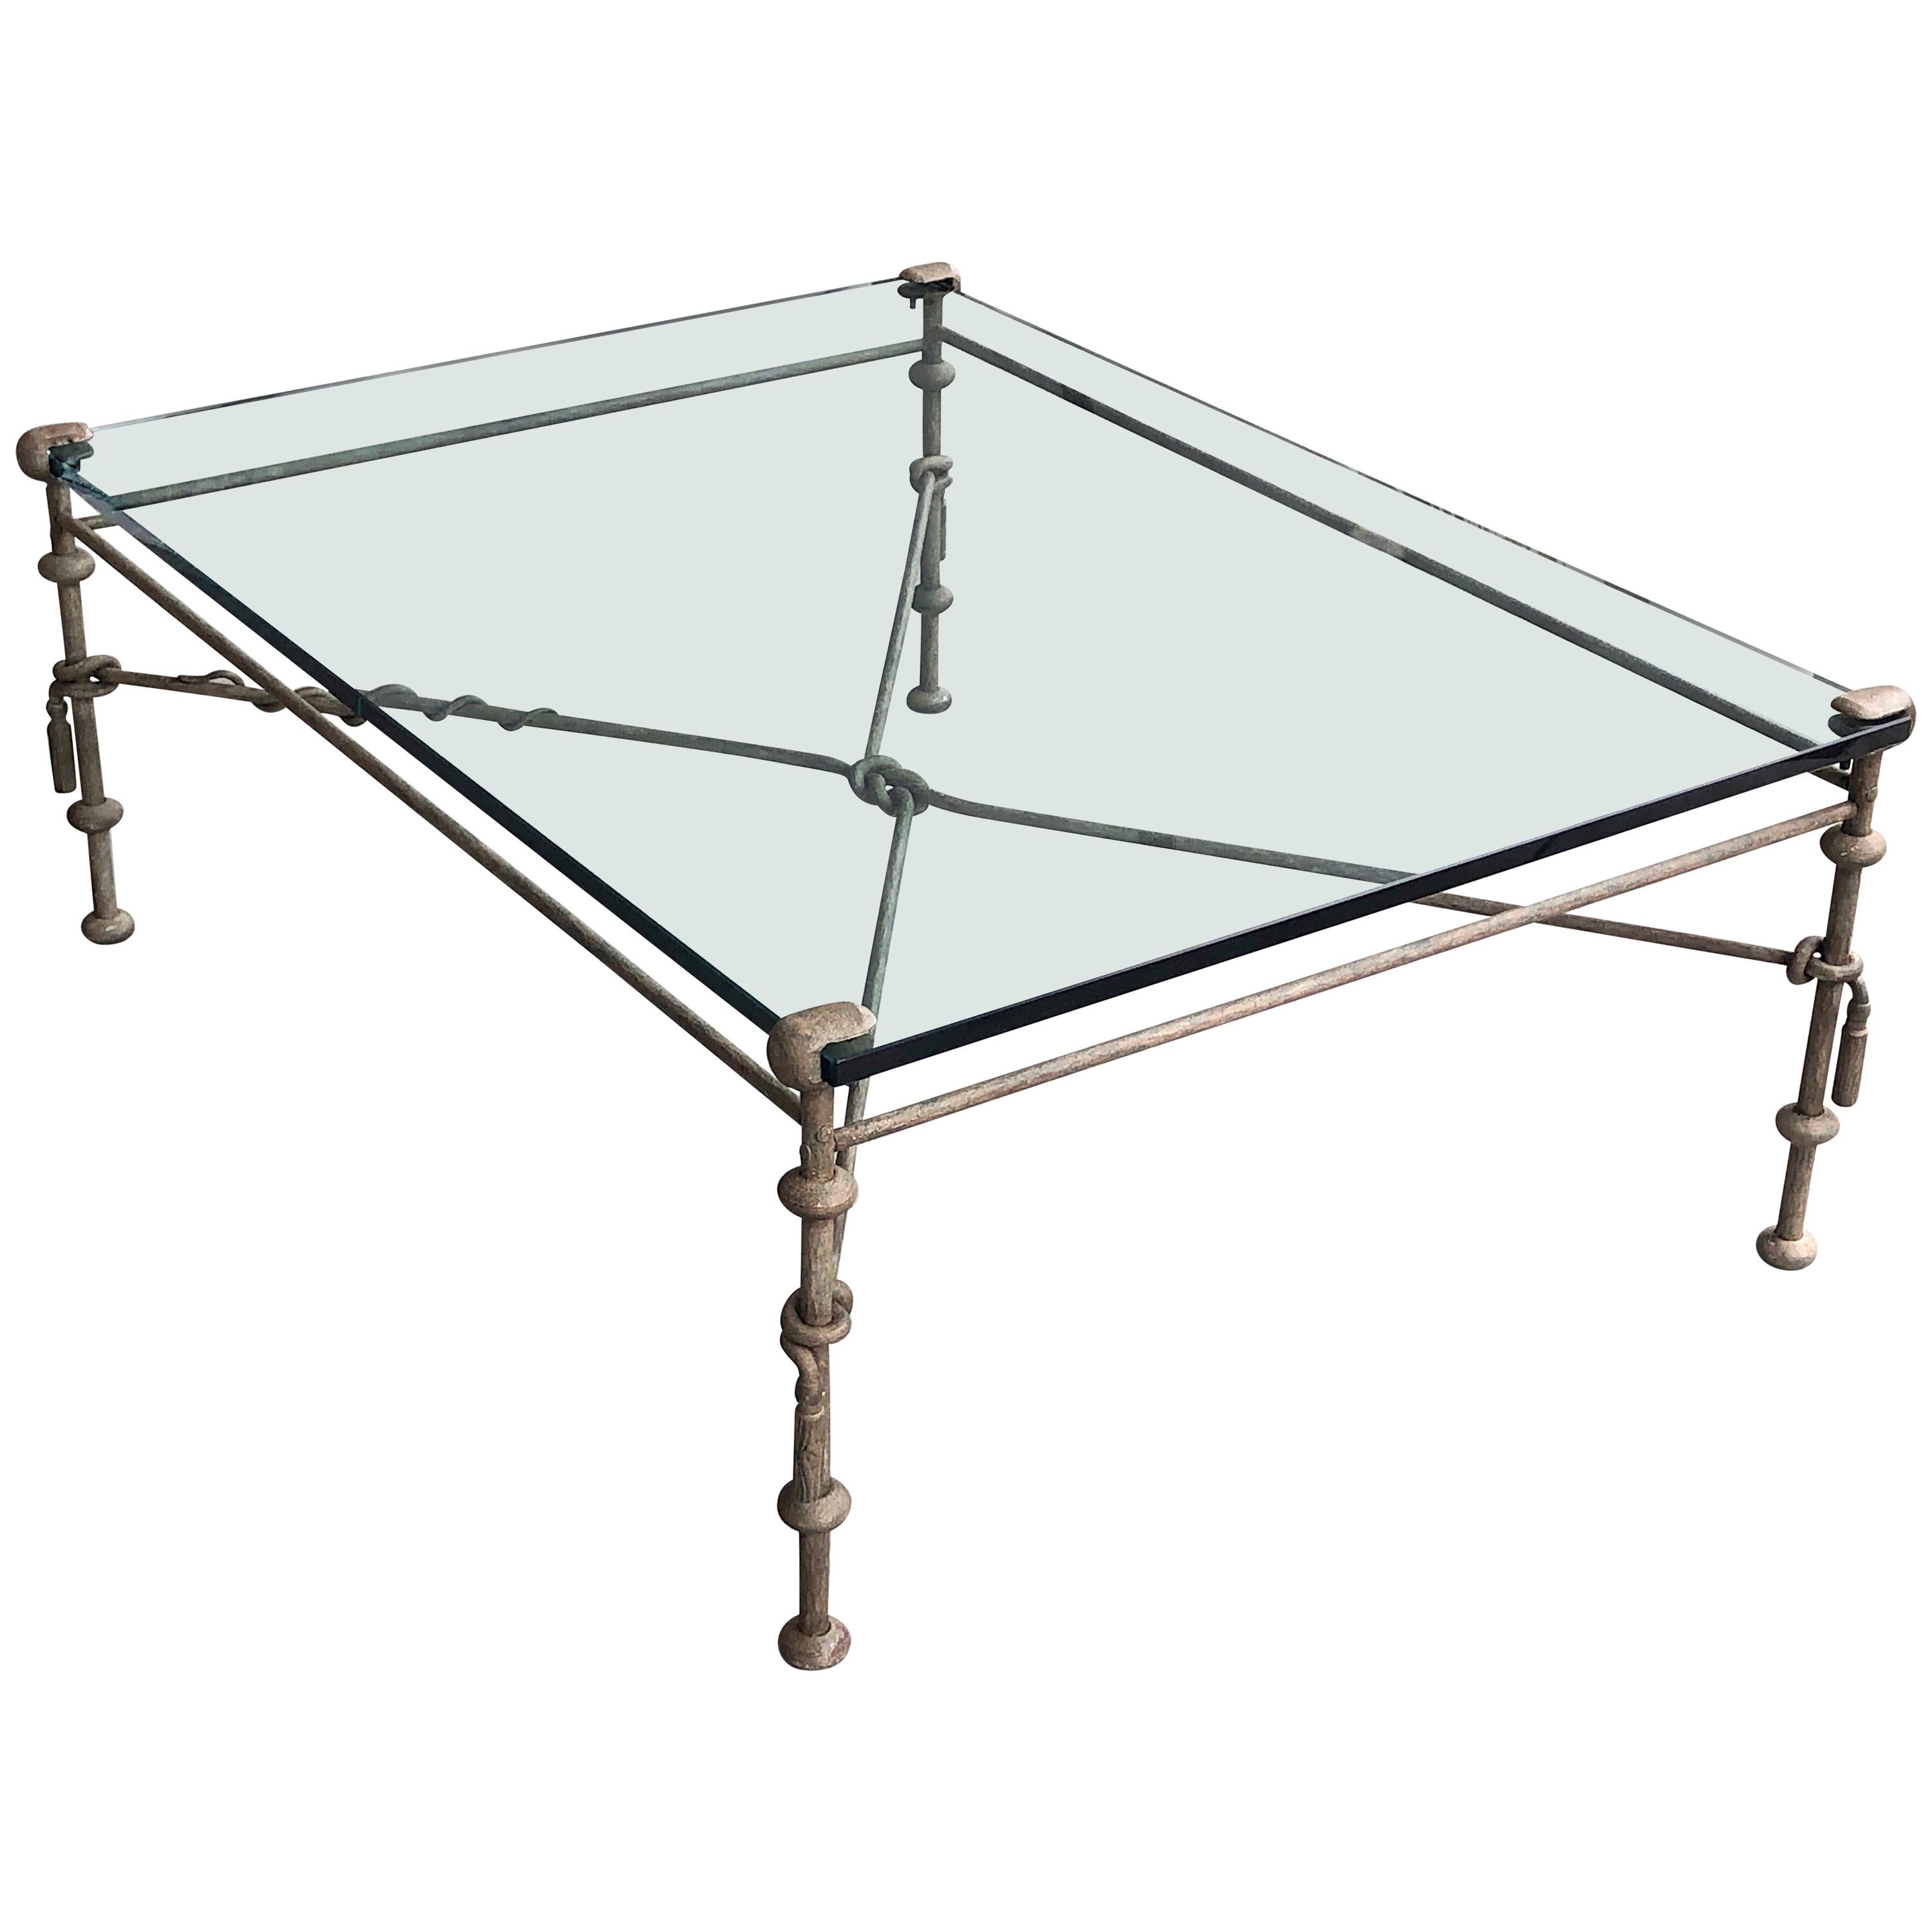 Giacometti Style Metal and Glass Coffee Cocktail Table with Tassels and Snake